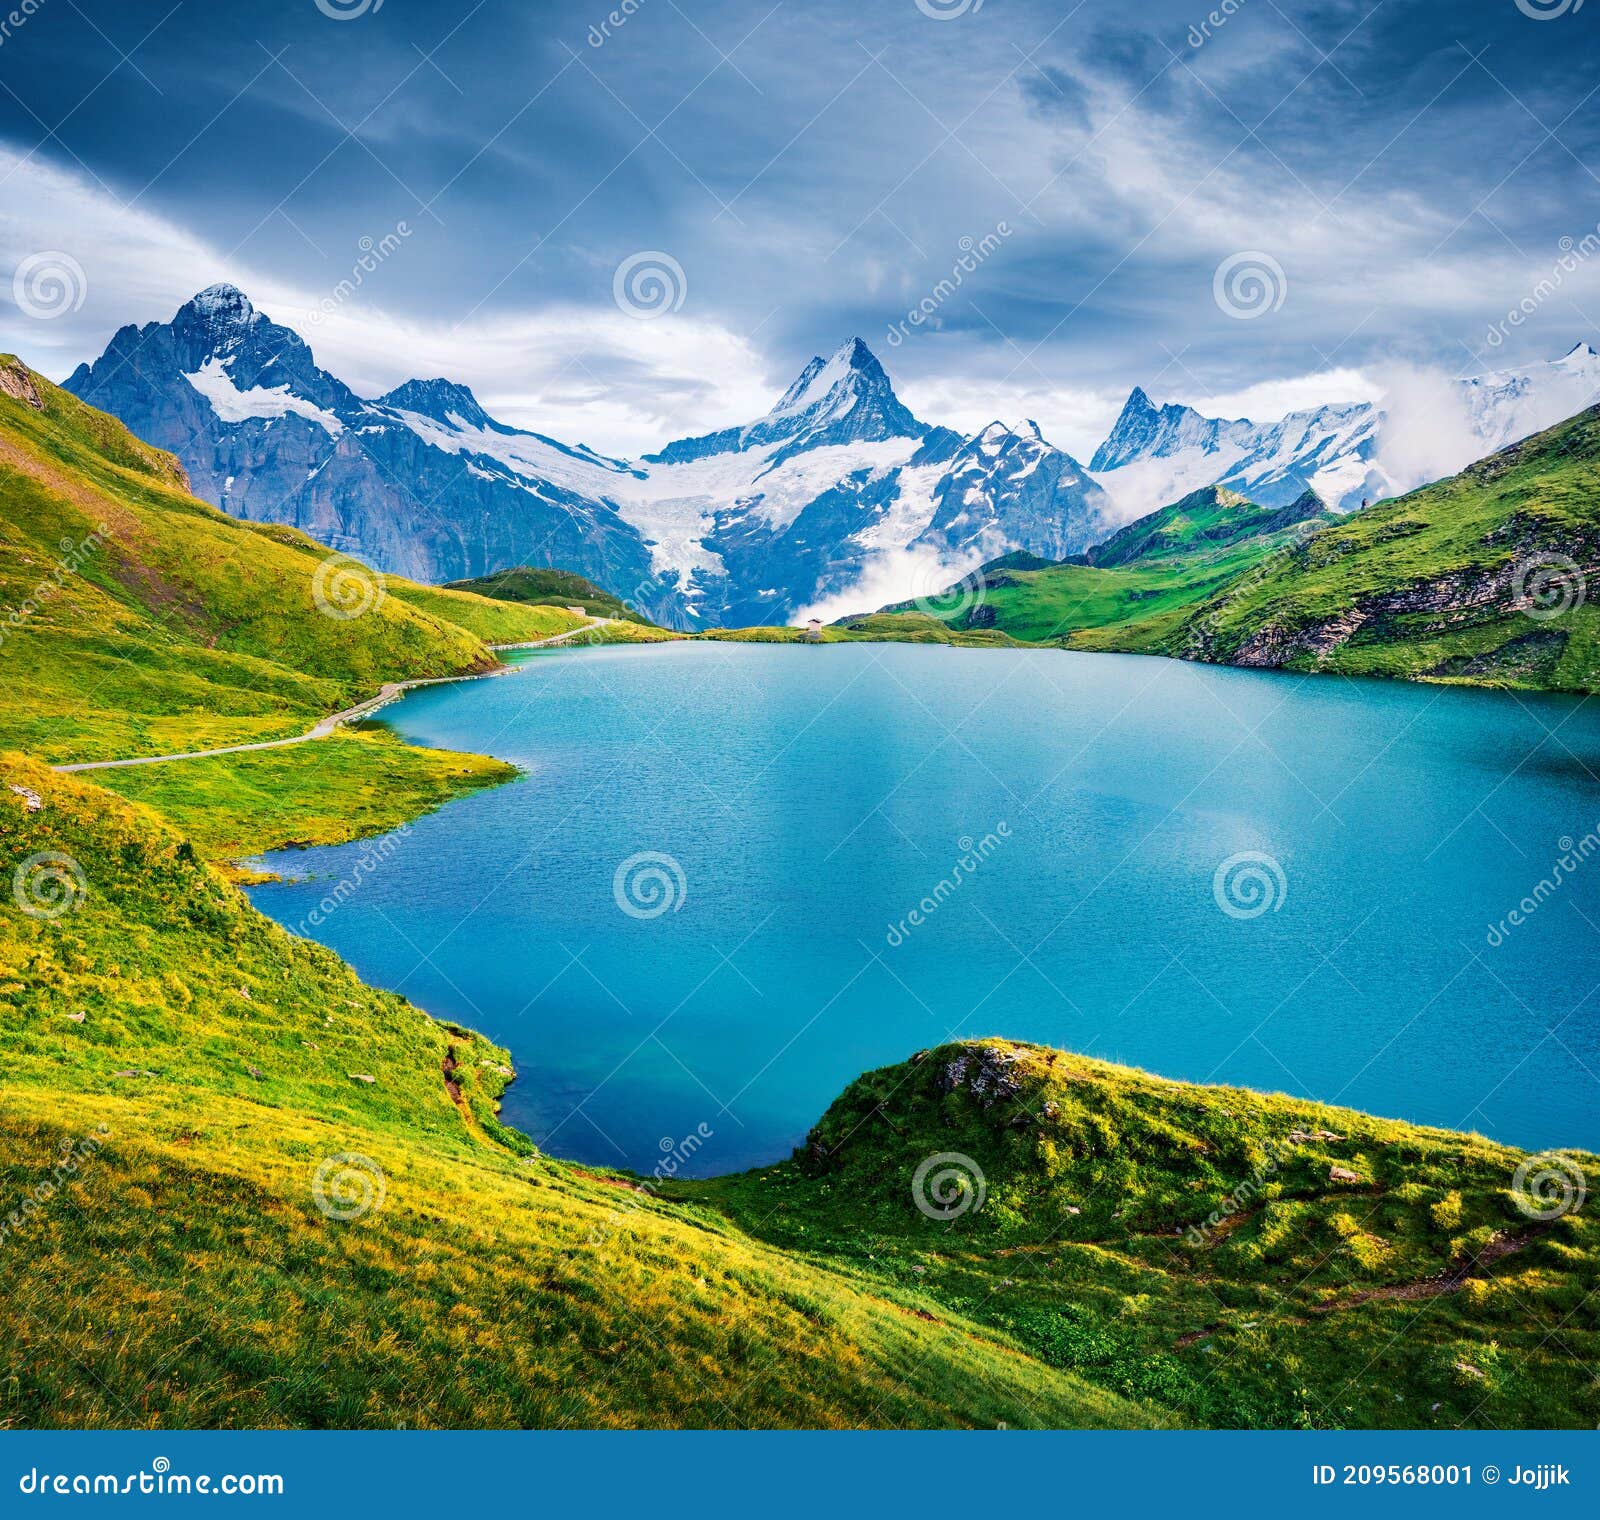 Dramatic Summer View Of The Bachalpsee Lake With Schreckhorn Peak On